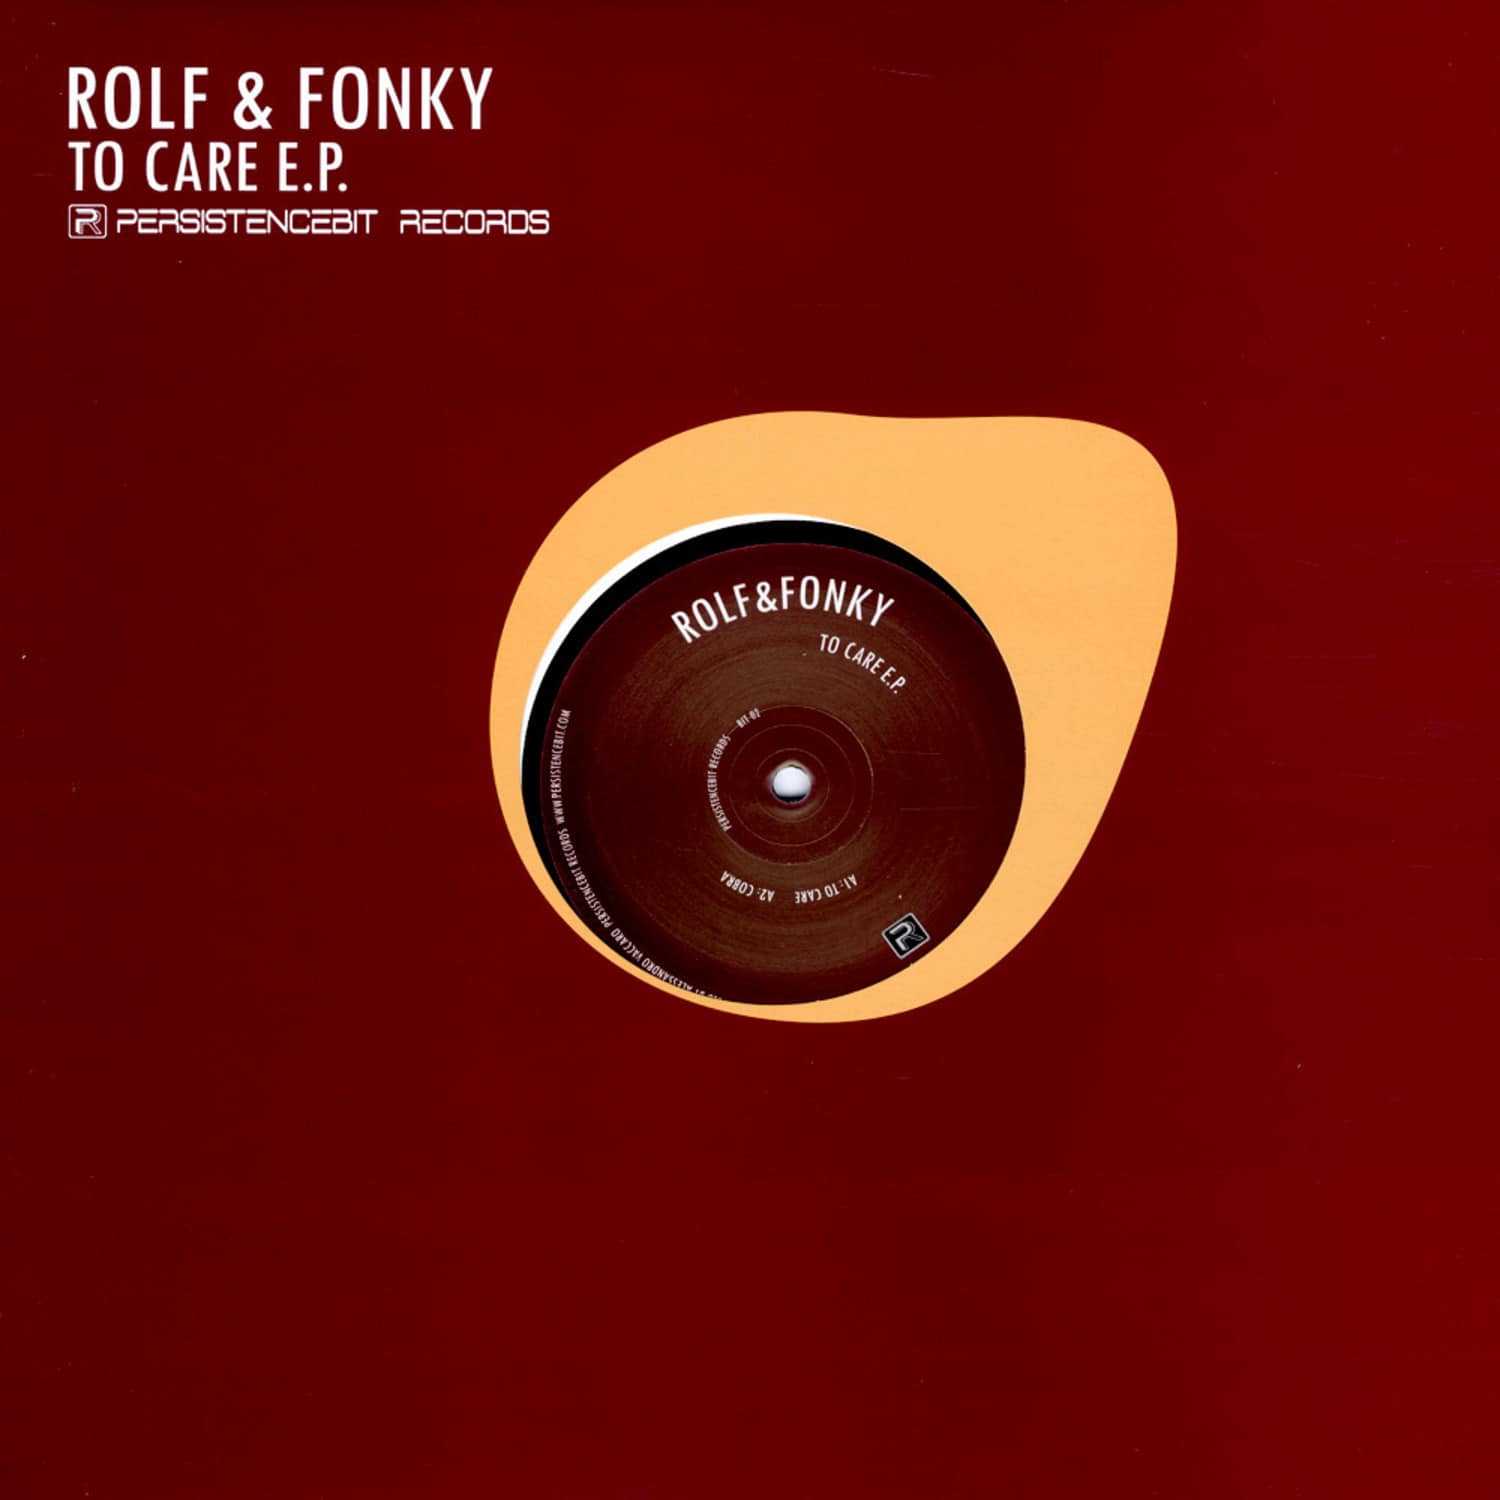 Rolf & Fonky - TO CARE EP